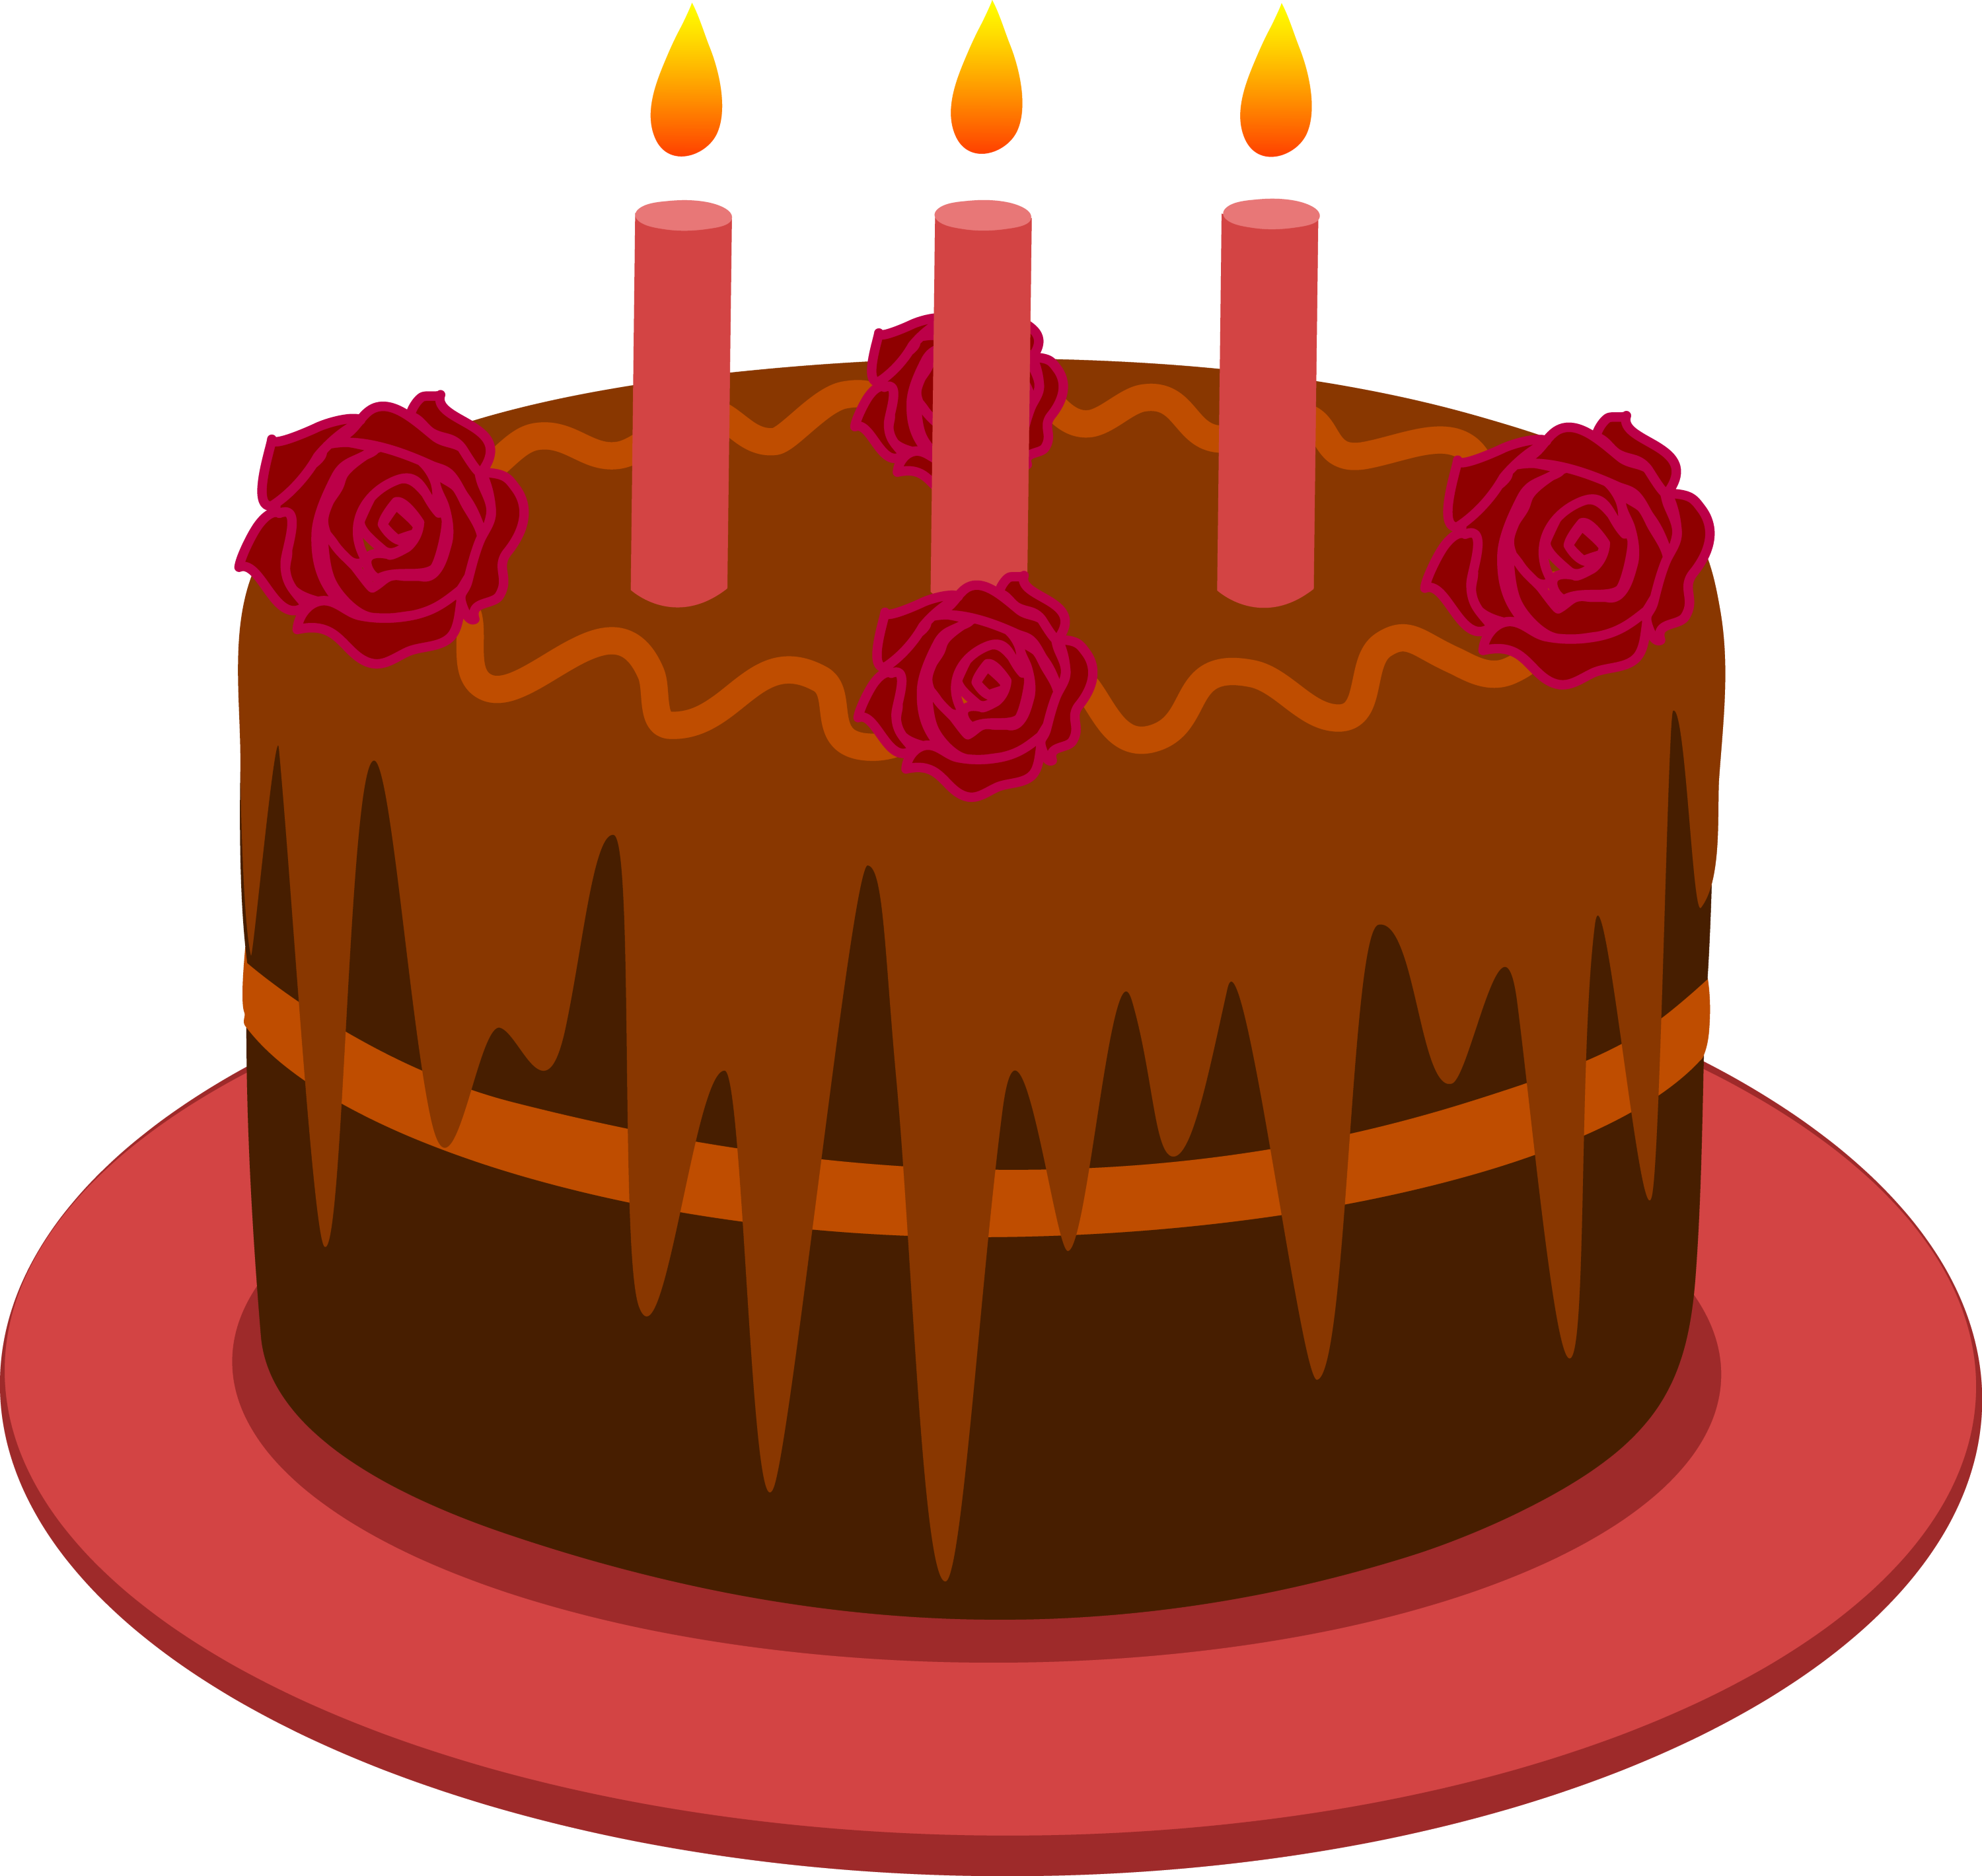 Chocolate Birthday Cake With Candles - Free Clip Art